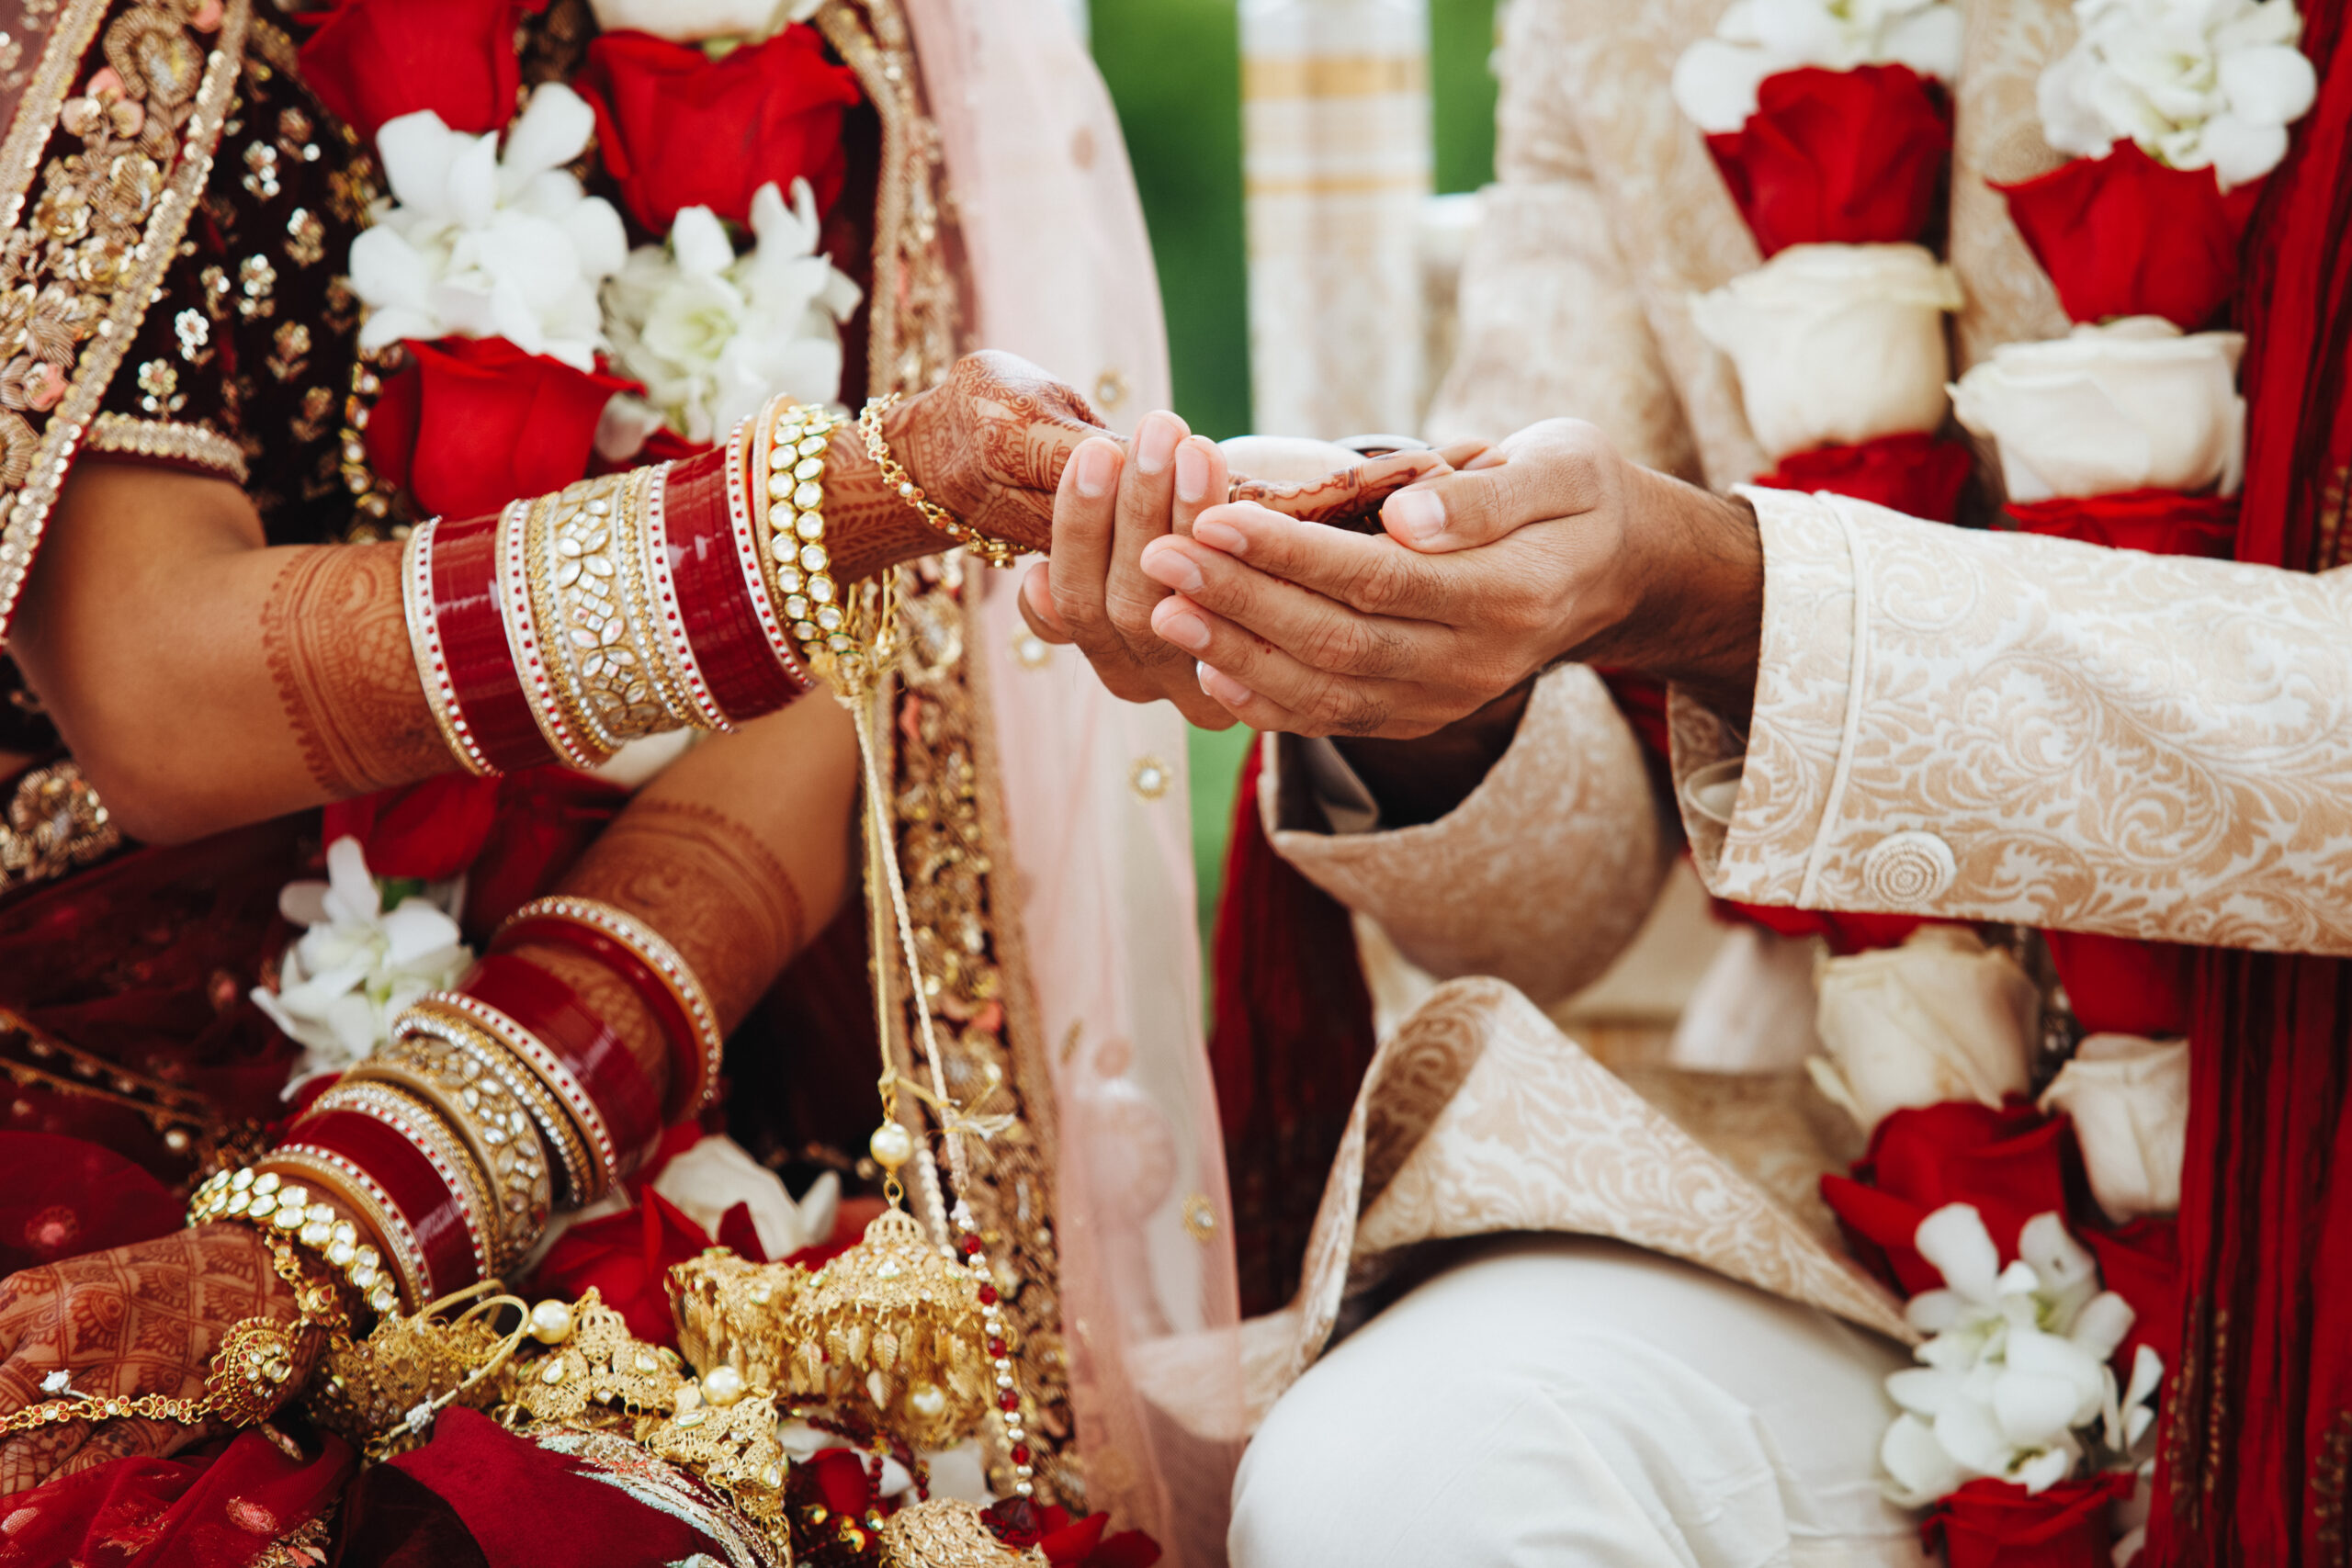 Hands of indian bride and groom intertwined together making authentic wedding ritual